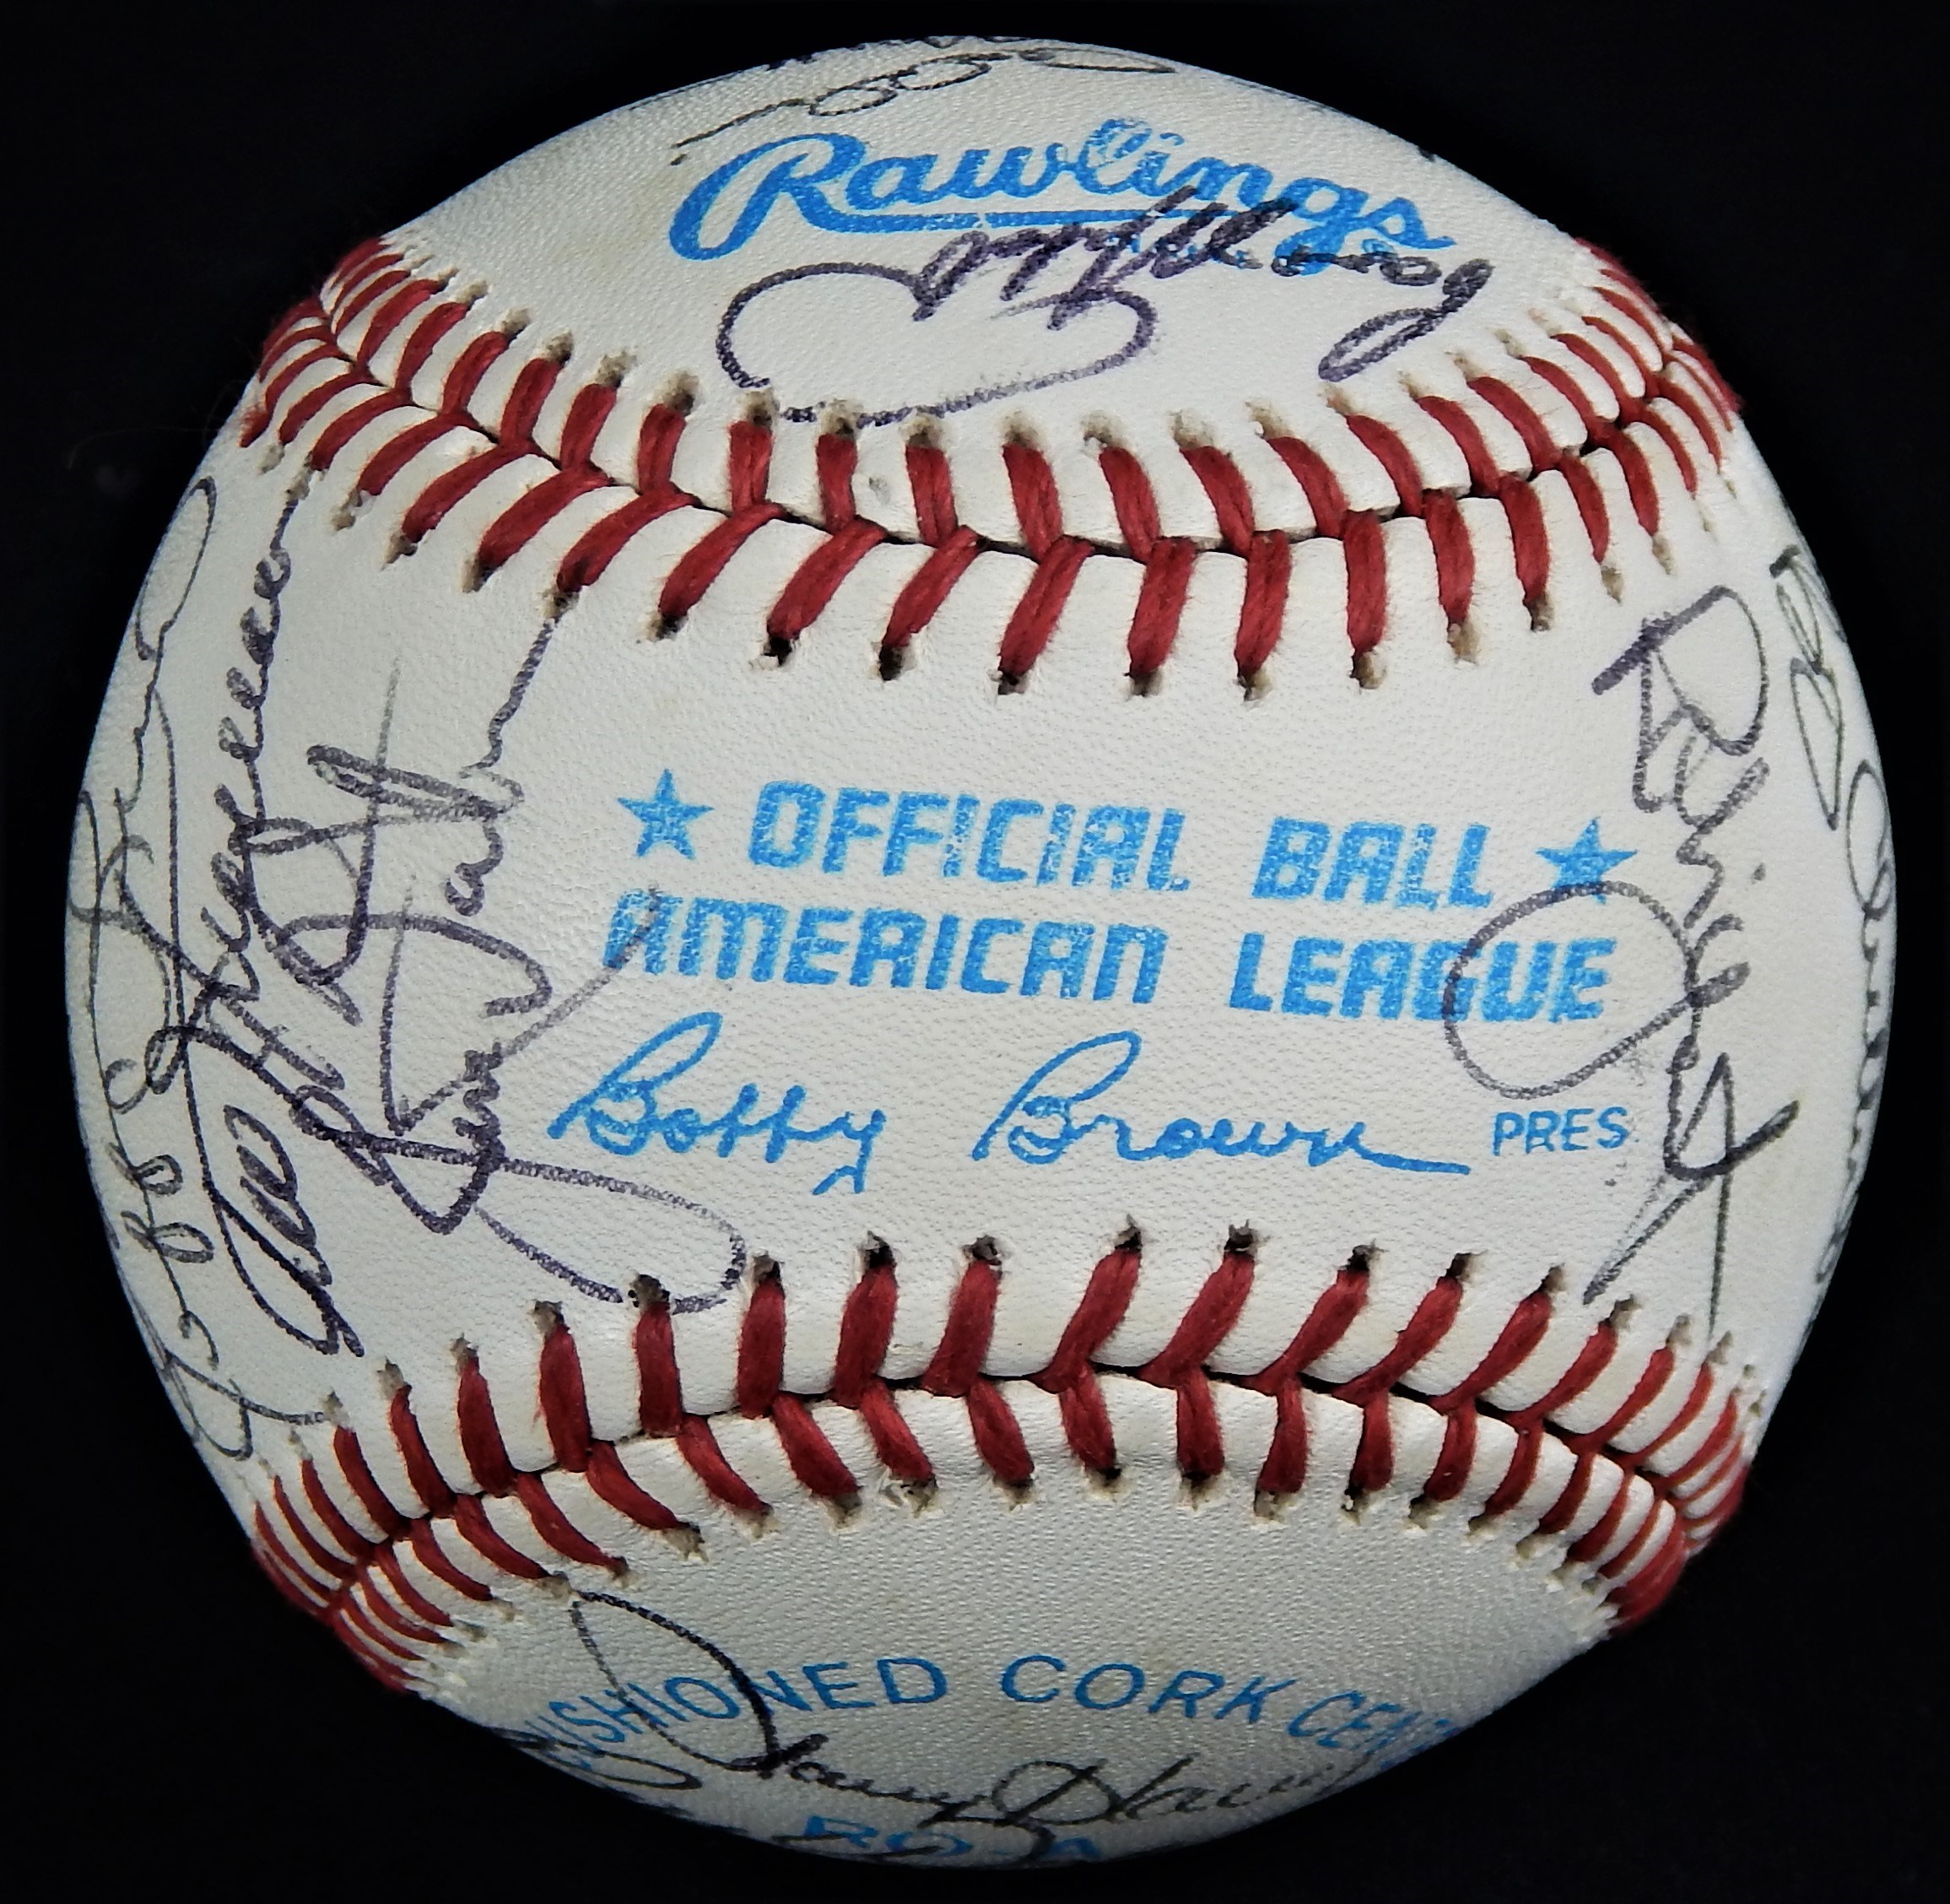 - 1988 Milwaukee Brewers Team Signed Baseball with Hall of Famers